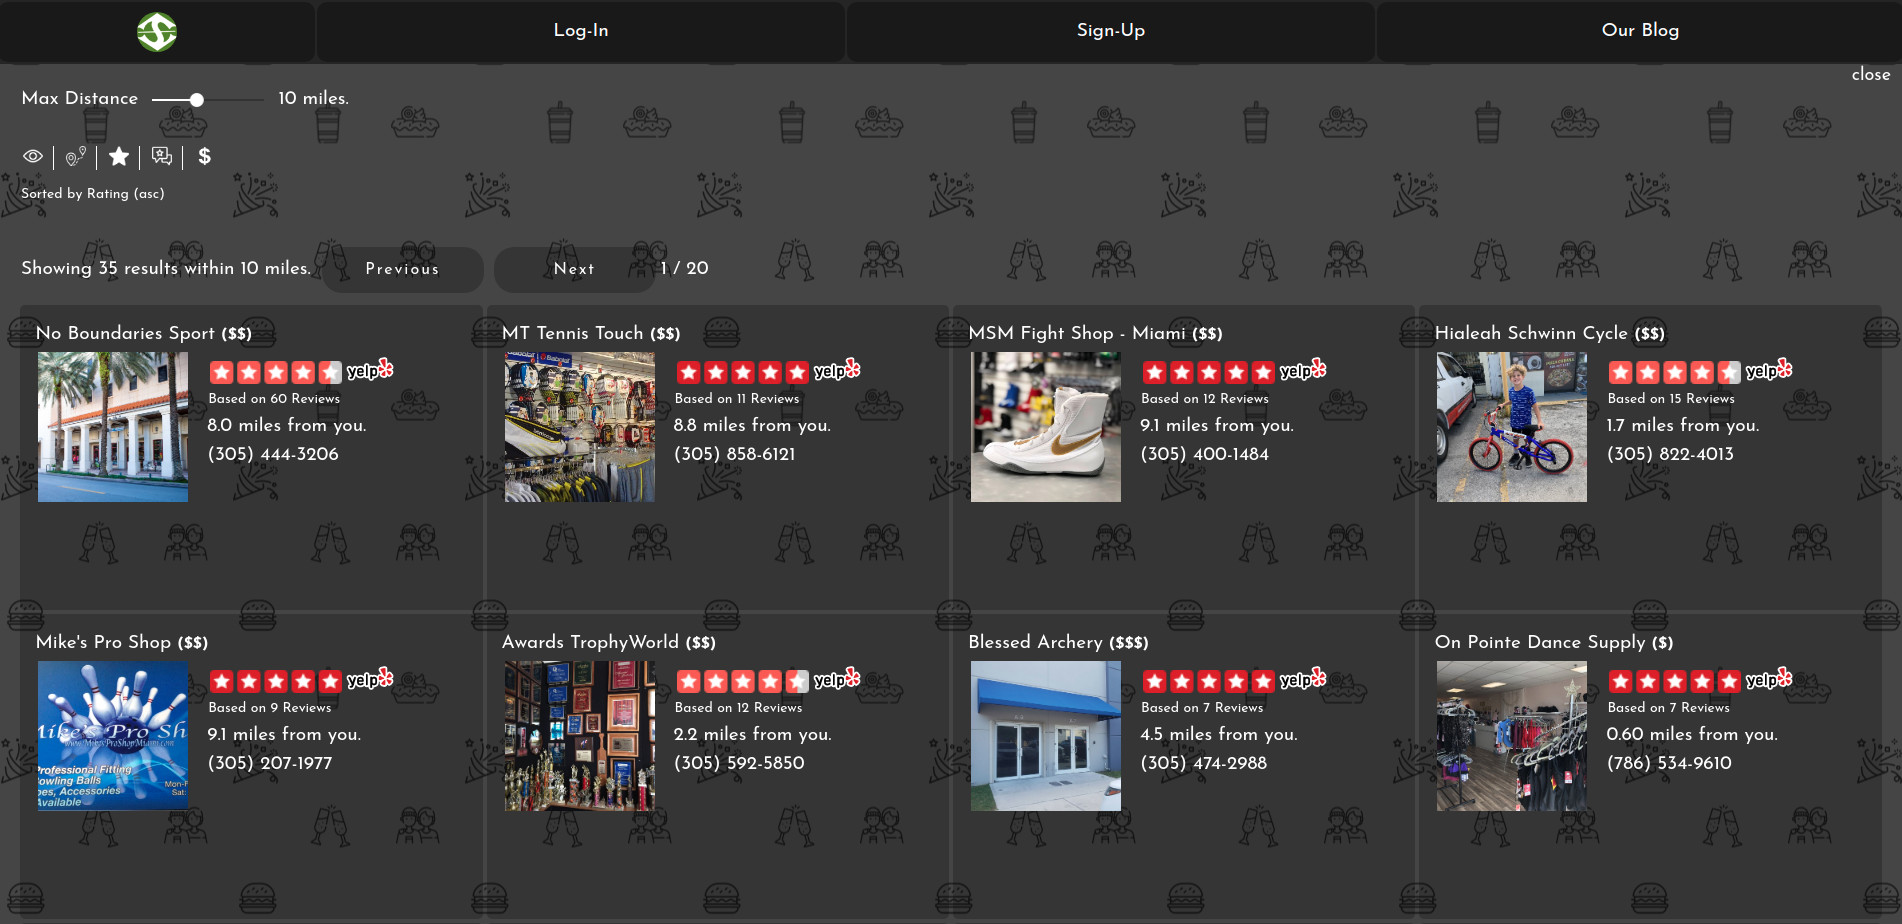 Image of SpotBie user interface with user trying to find the best places to shop in Hallandale.